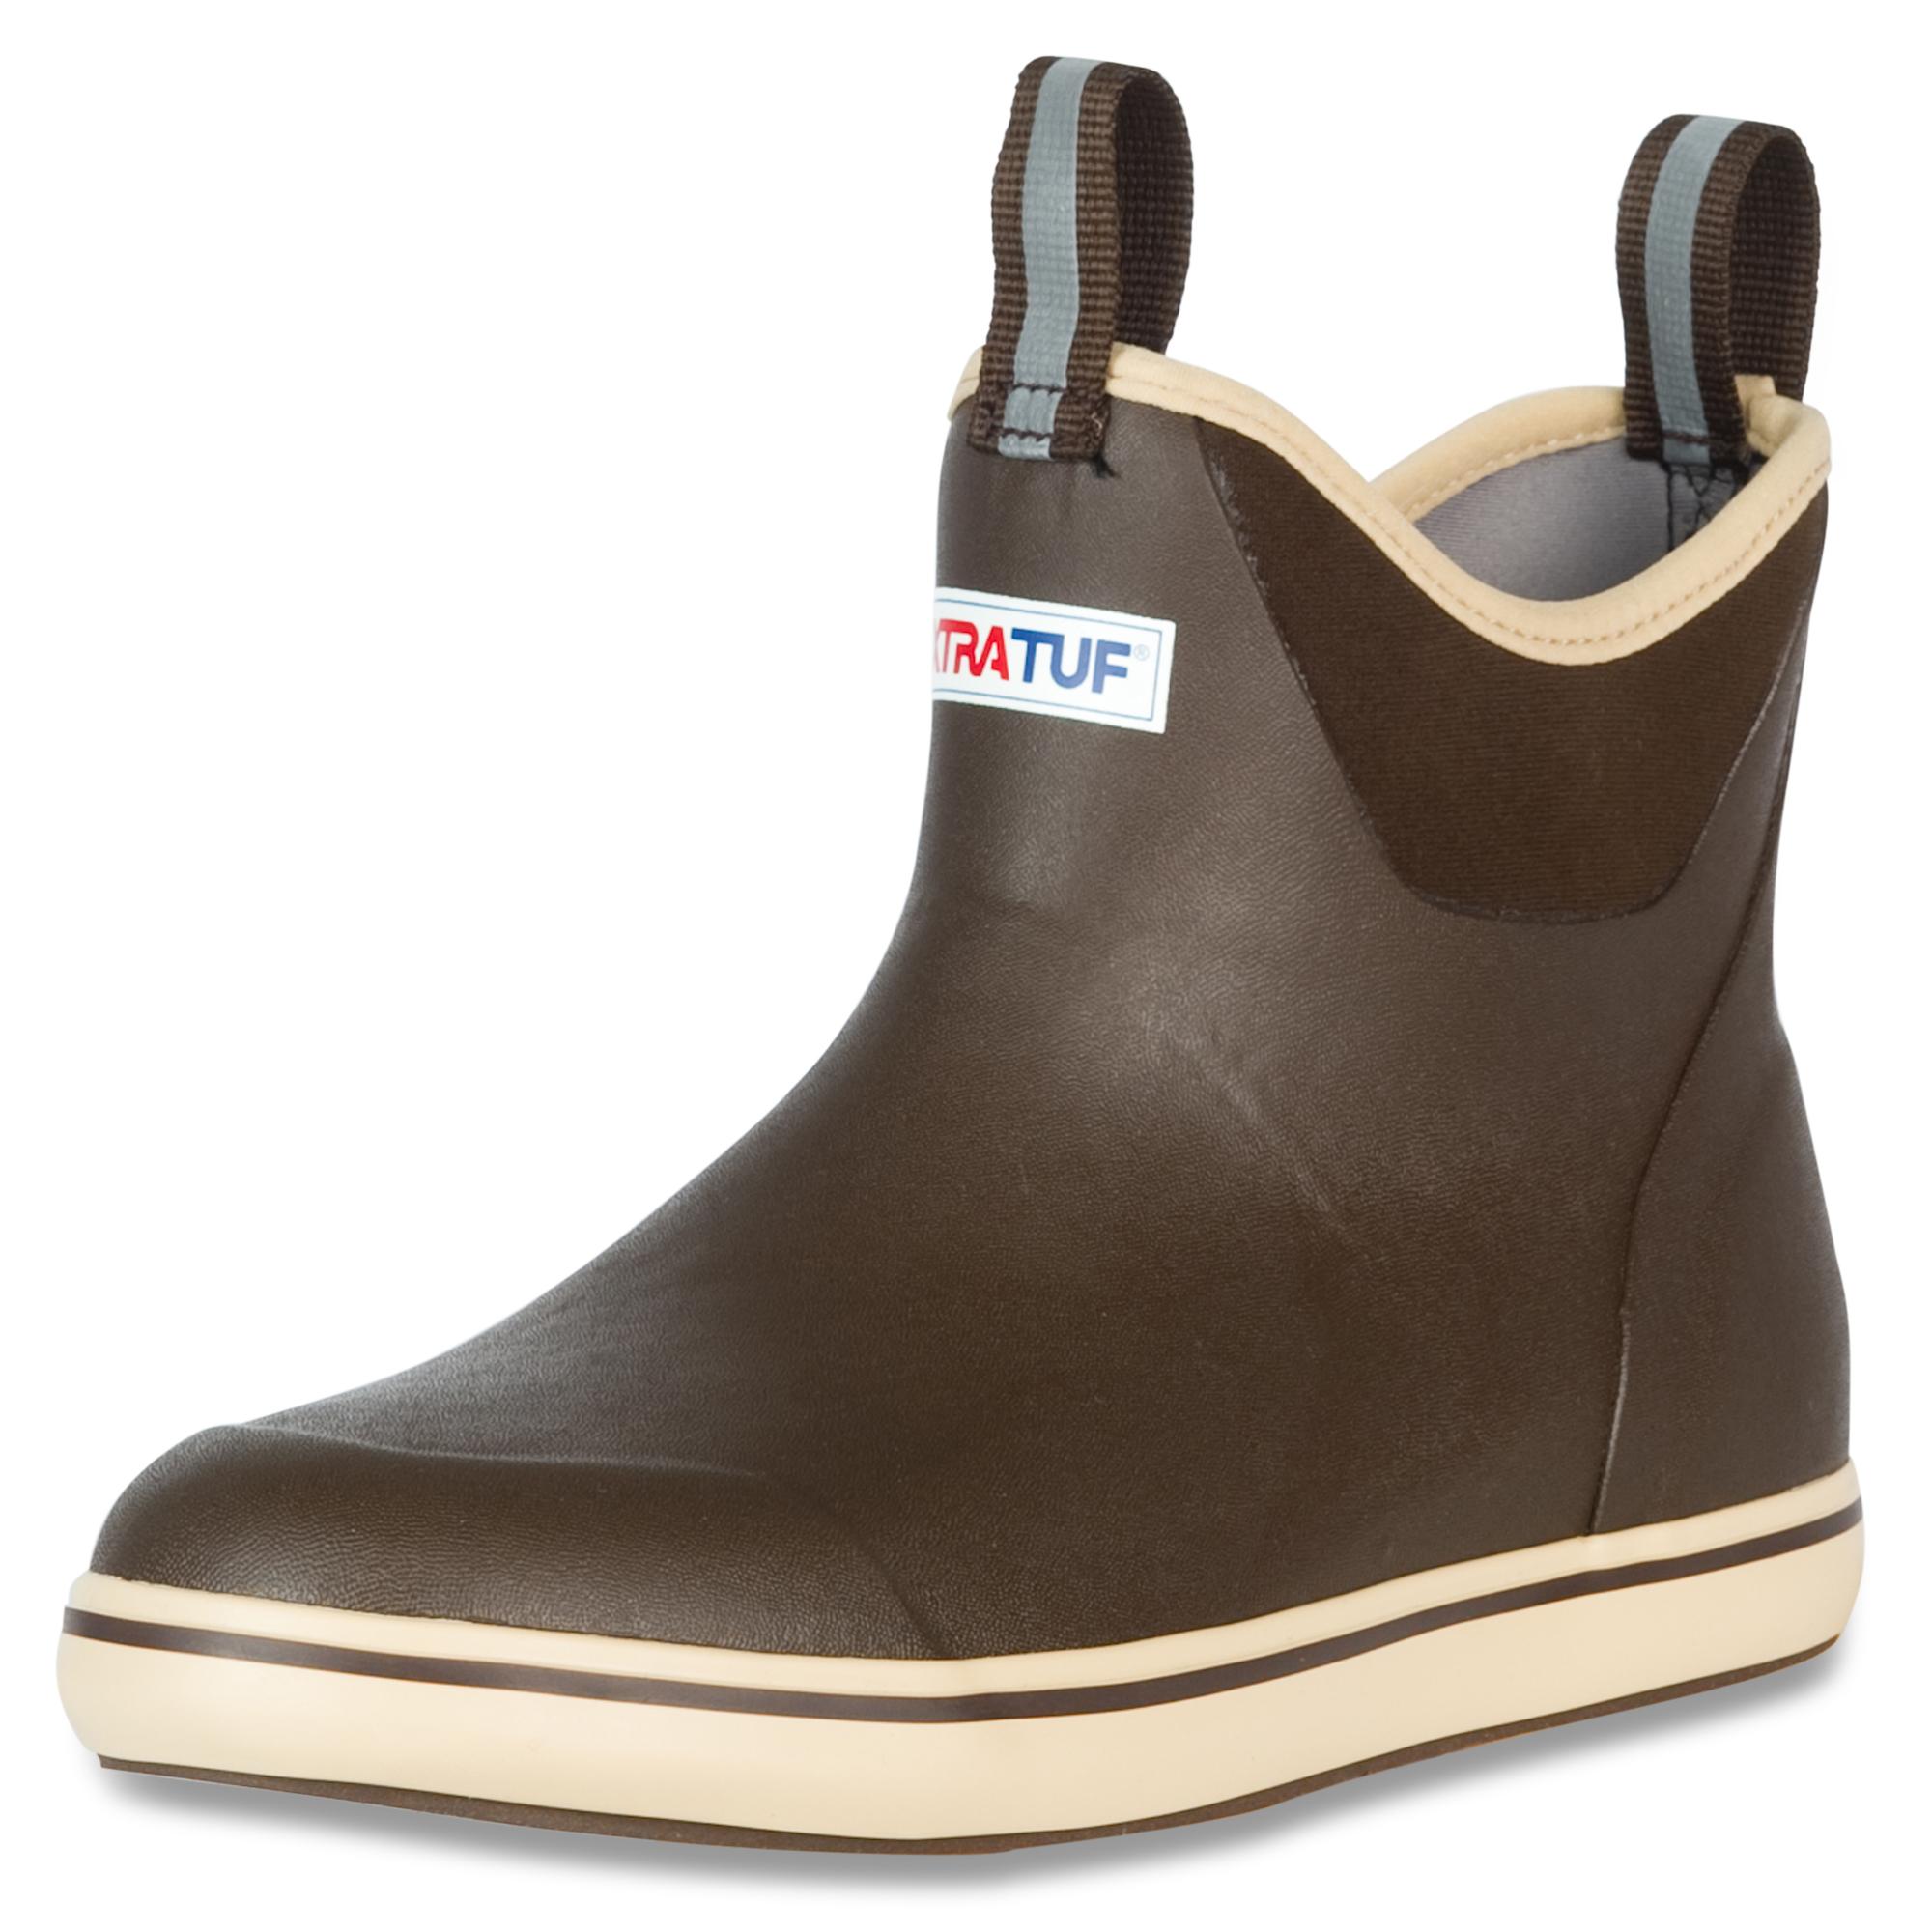 Xtratuf 6 inch ankle deck boot